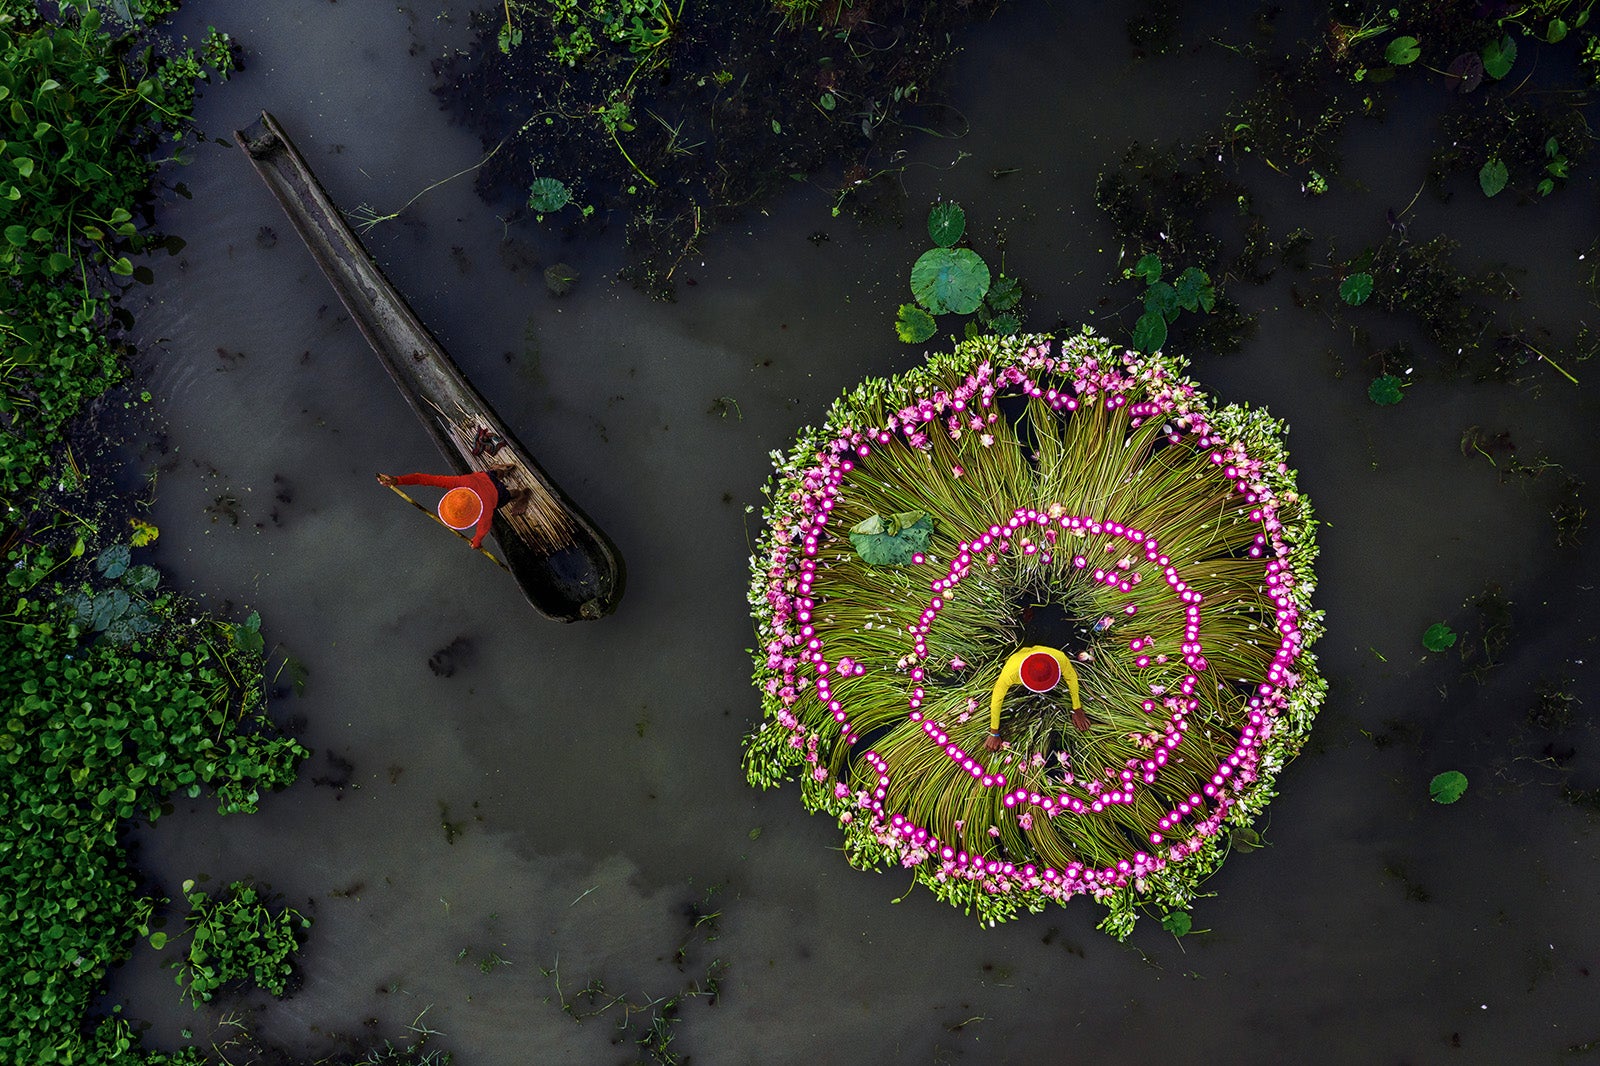 rmets weather photographer of the year Barrackpore, West Bengal, India waterlily harvest